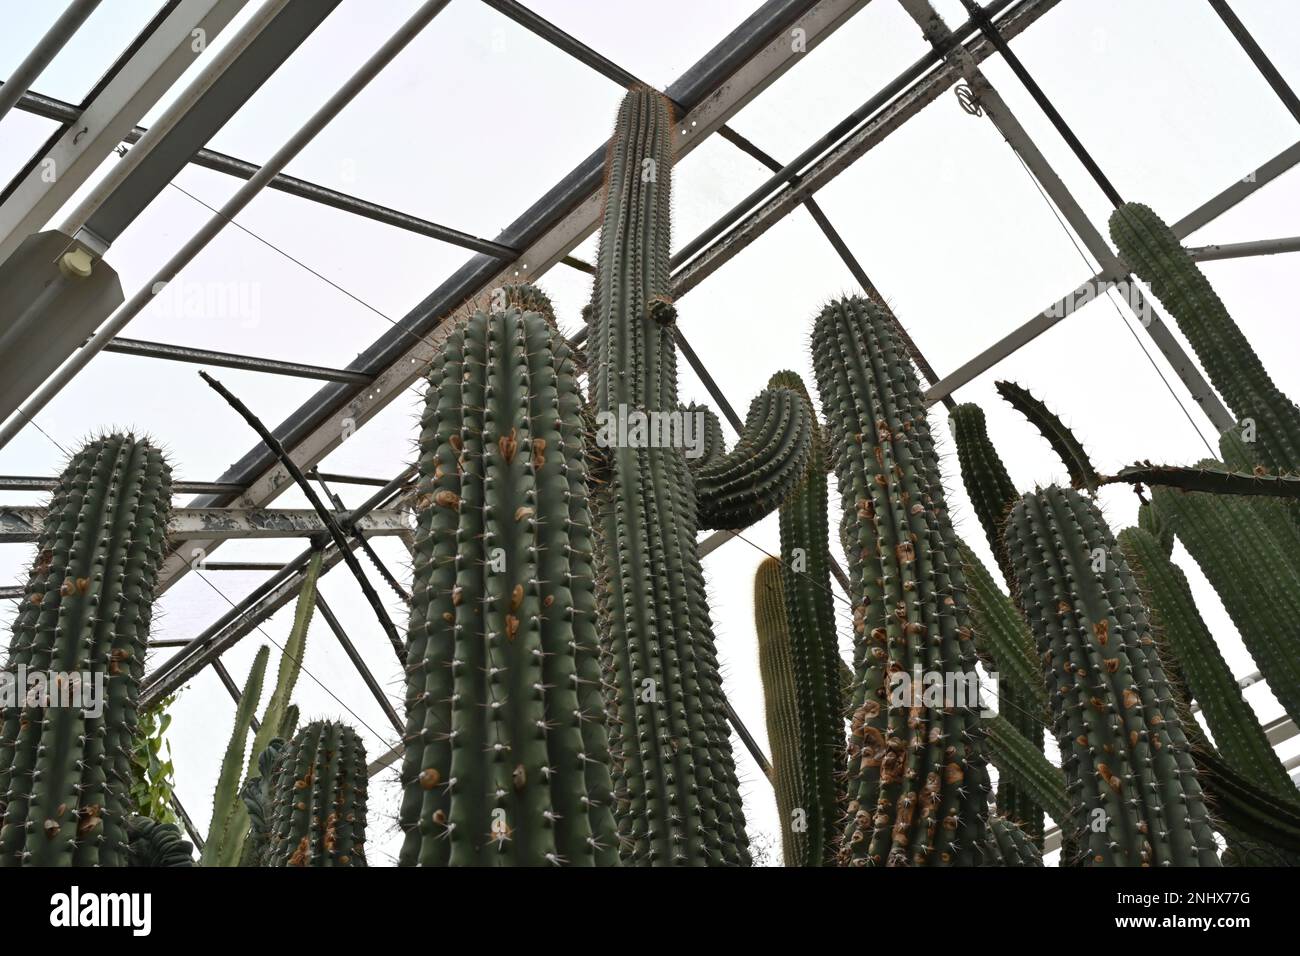 Cactus called in Latin Cephalocereus scoparius. Long stems captured in low angle view. On the background there is a greenhouse construction. Stock Photo